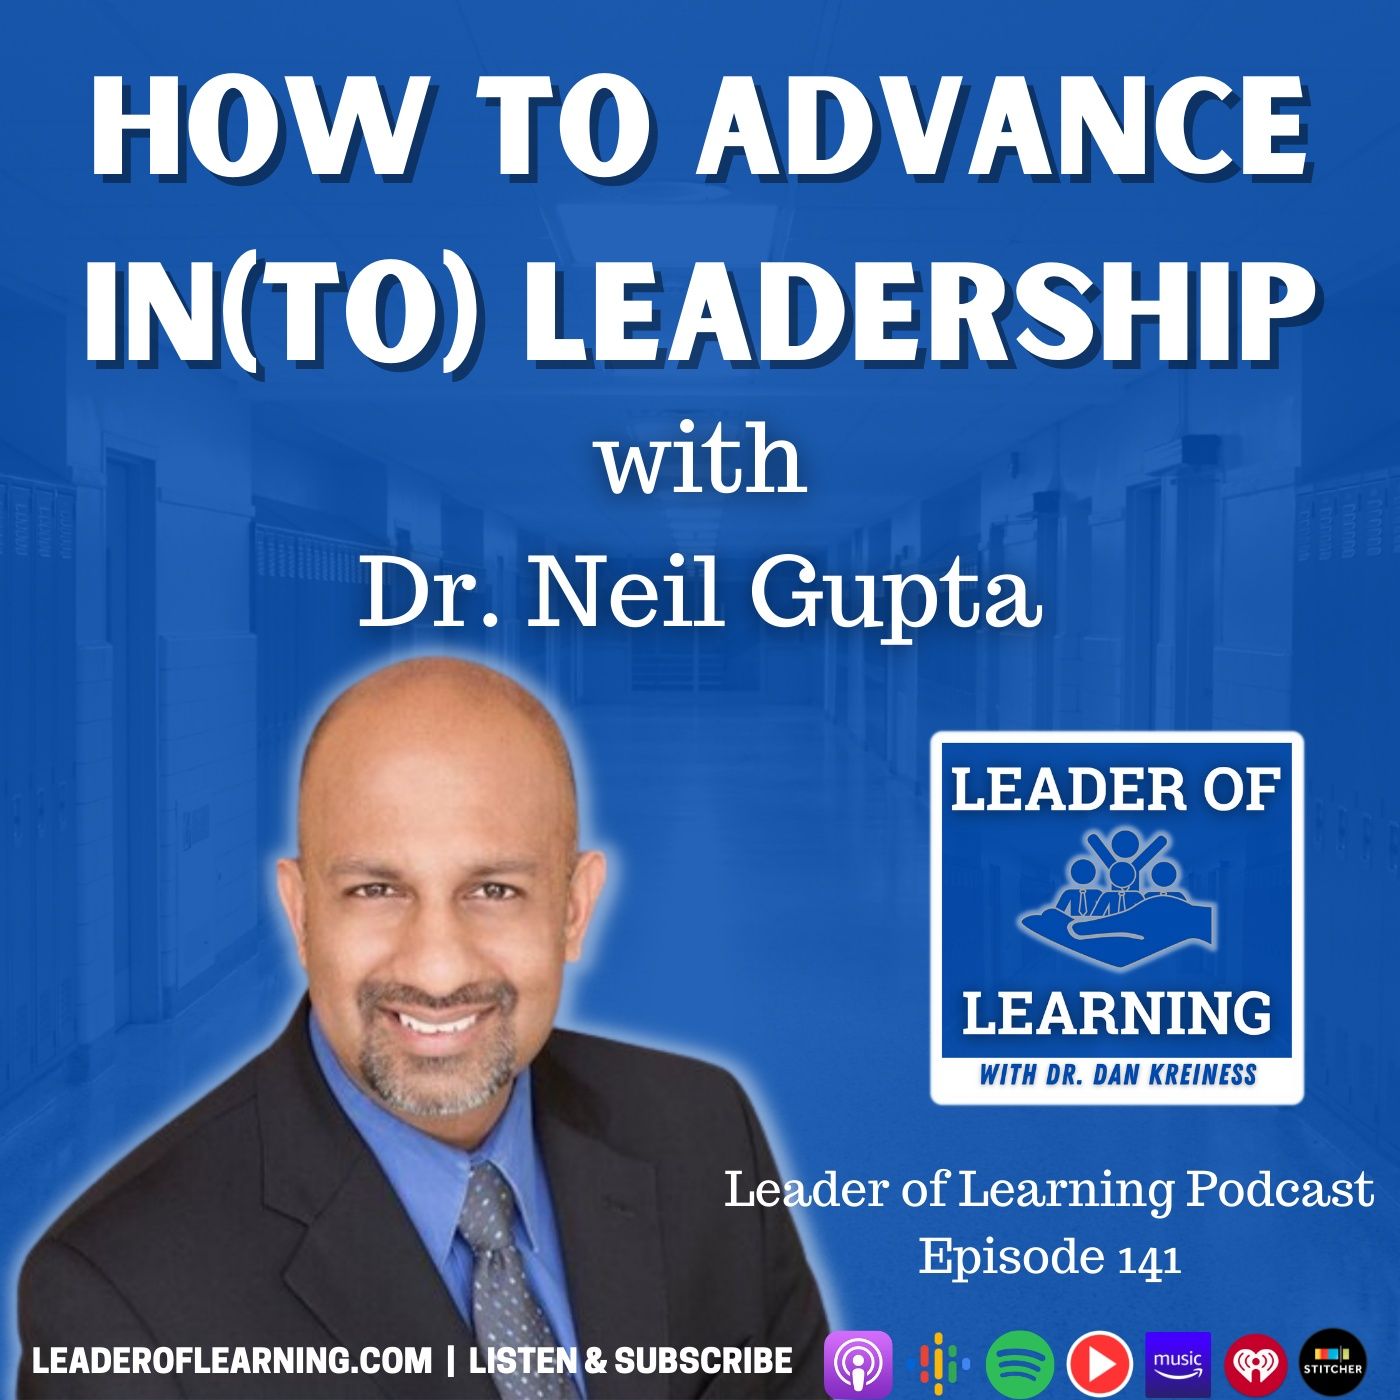 How to advance in(to) leadership with Dr. Neil Gupta Image